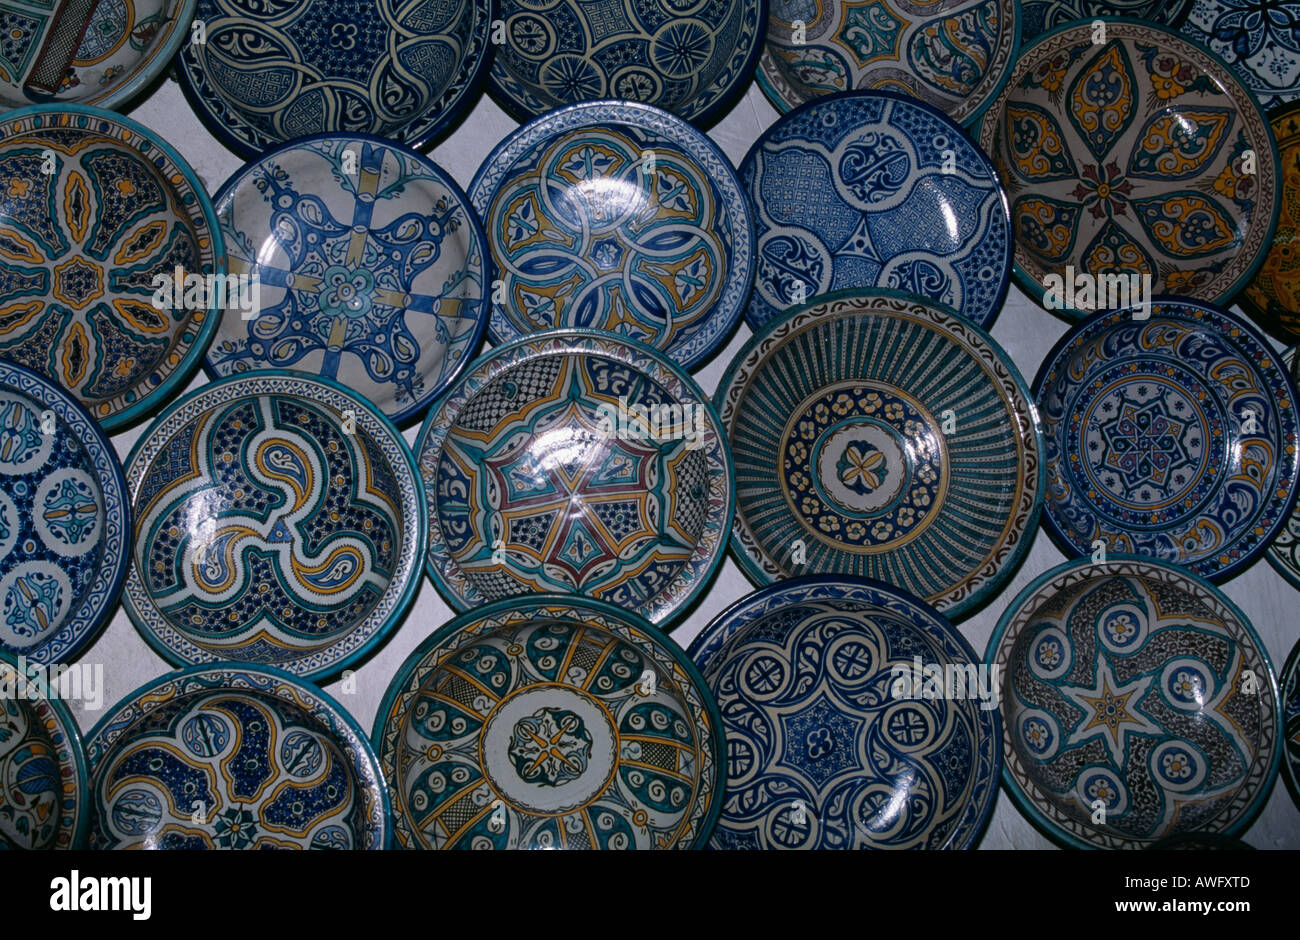 Plates in the Potters Souk near Djemaa El Fna, Marrakesh, Morocco. Stock Photo